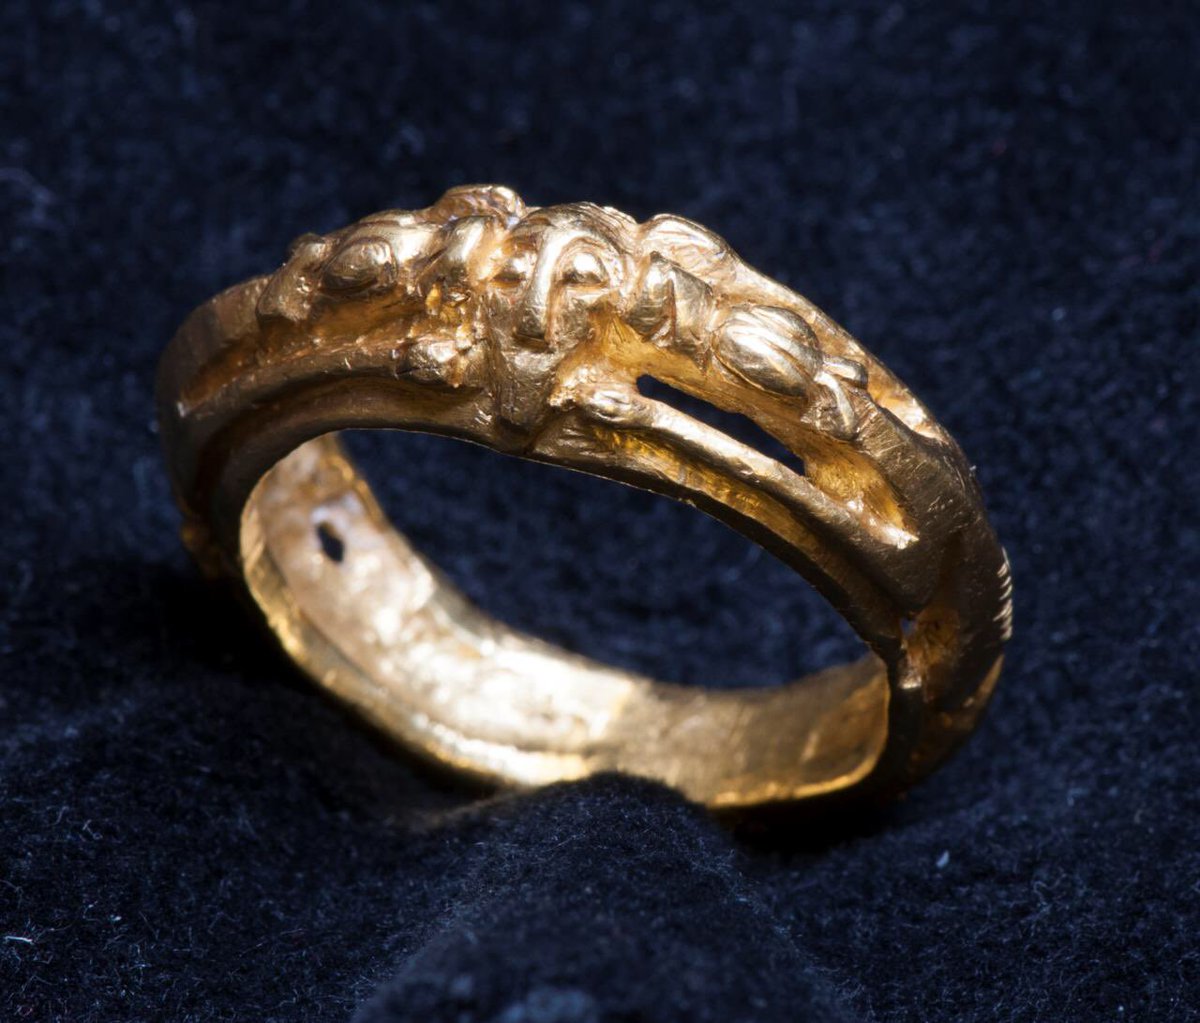 The Fishergate Ring was displayed briefly in the area of York it is named after #OTD in 2014. The Anglian gold treasure was found there around 1930 and given to Yorkshire Museum in 1951. ©York Museums Trust